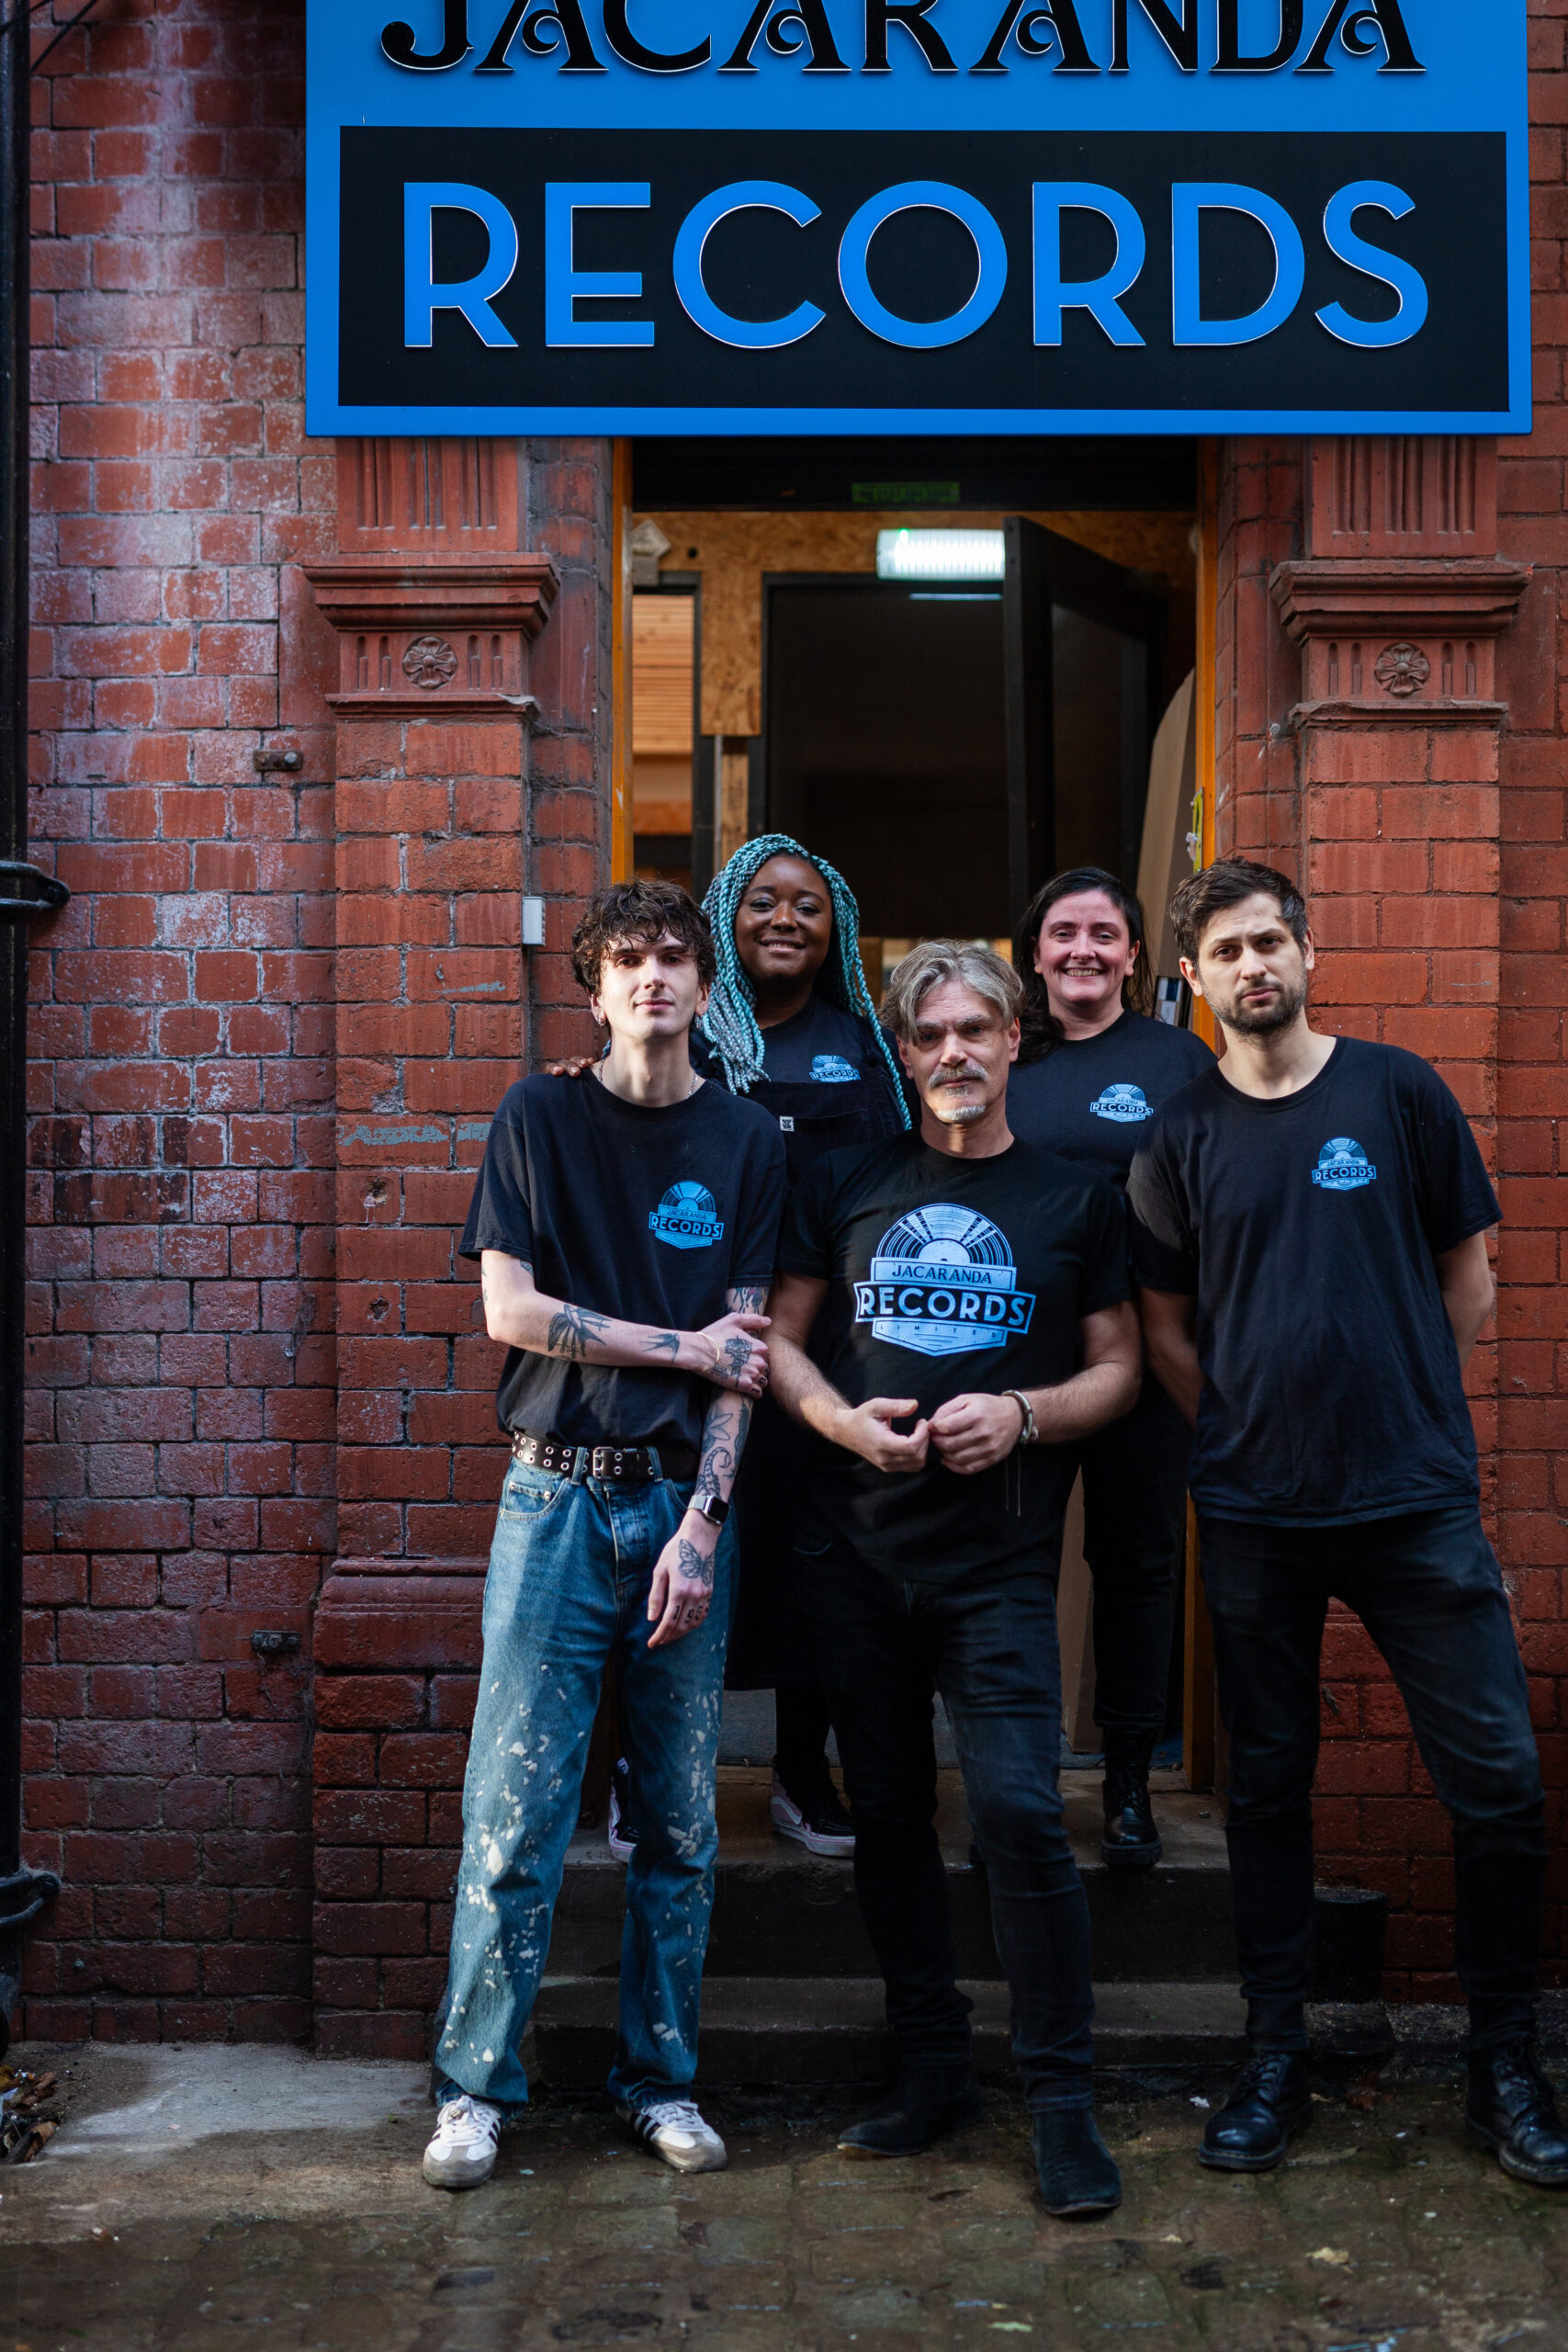 Sixty five years after opening on Slater Street, Liverpool's iconic Jacaranda is opening another premises in the Baltic Triangle - Jacaranda Baltic